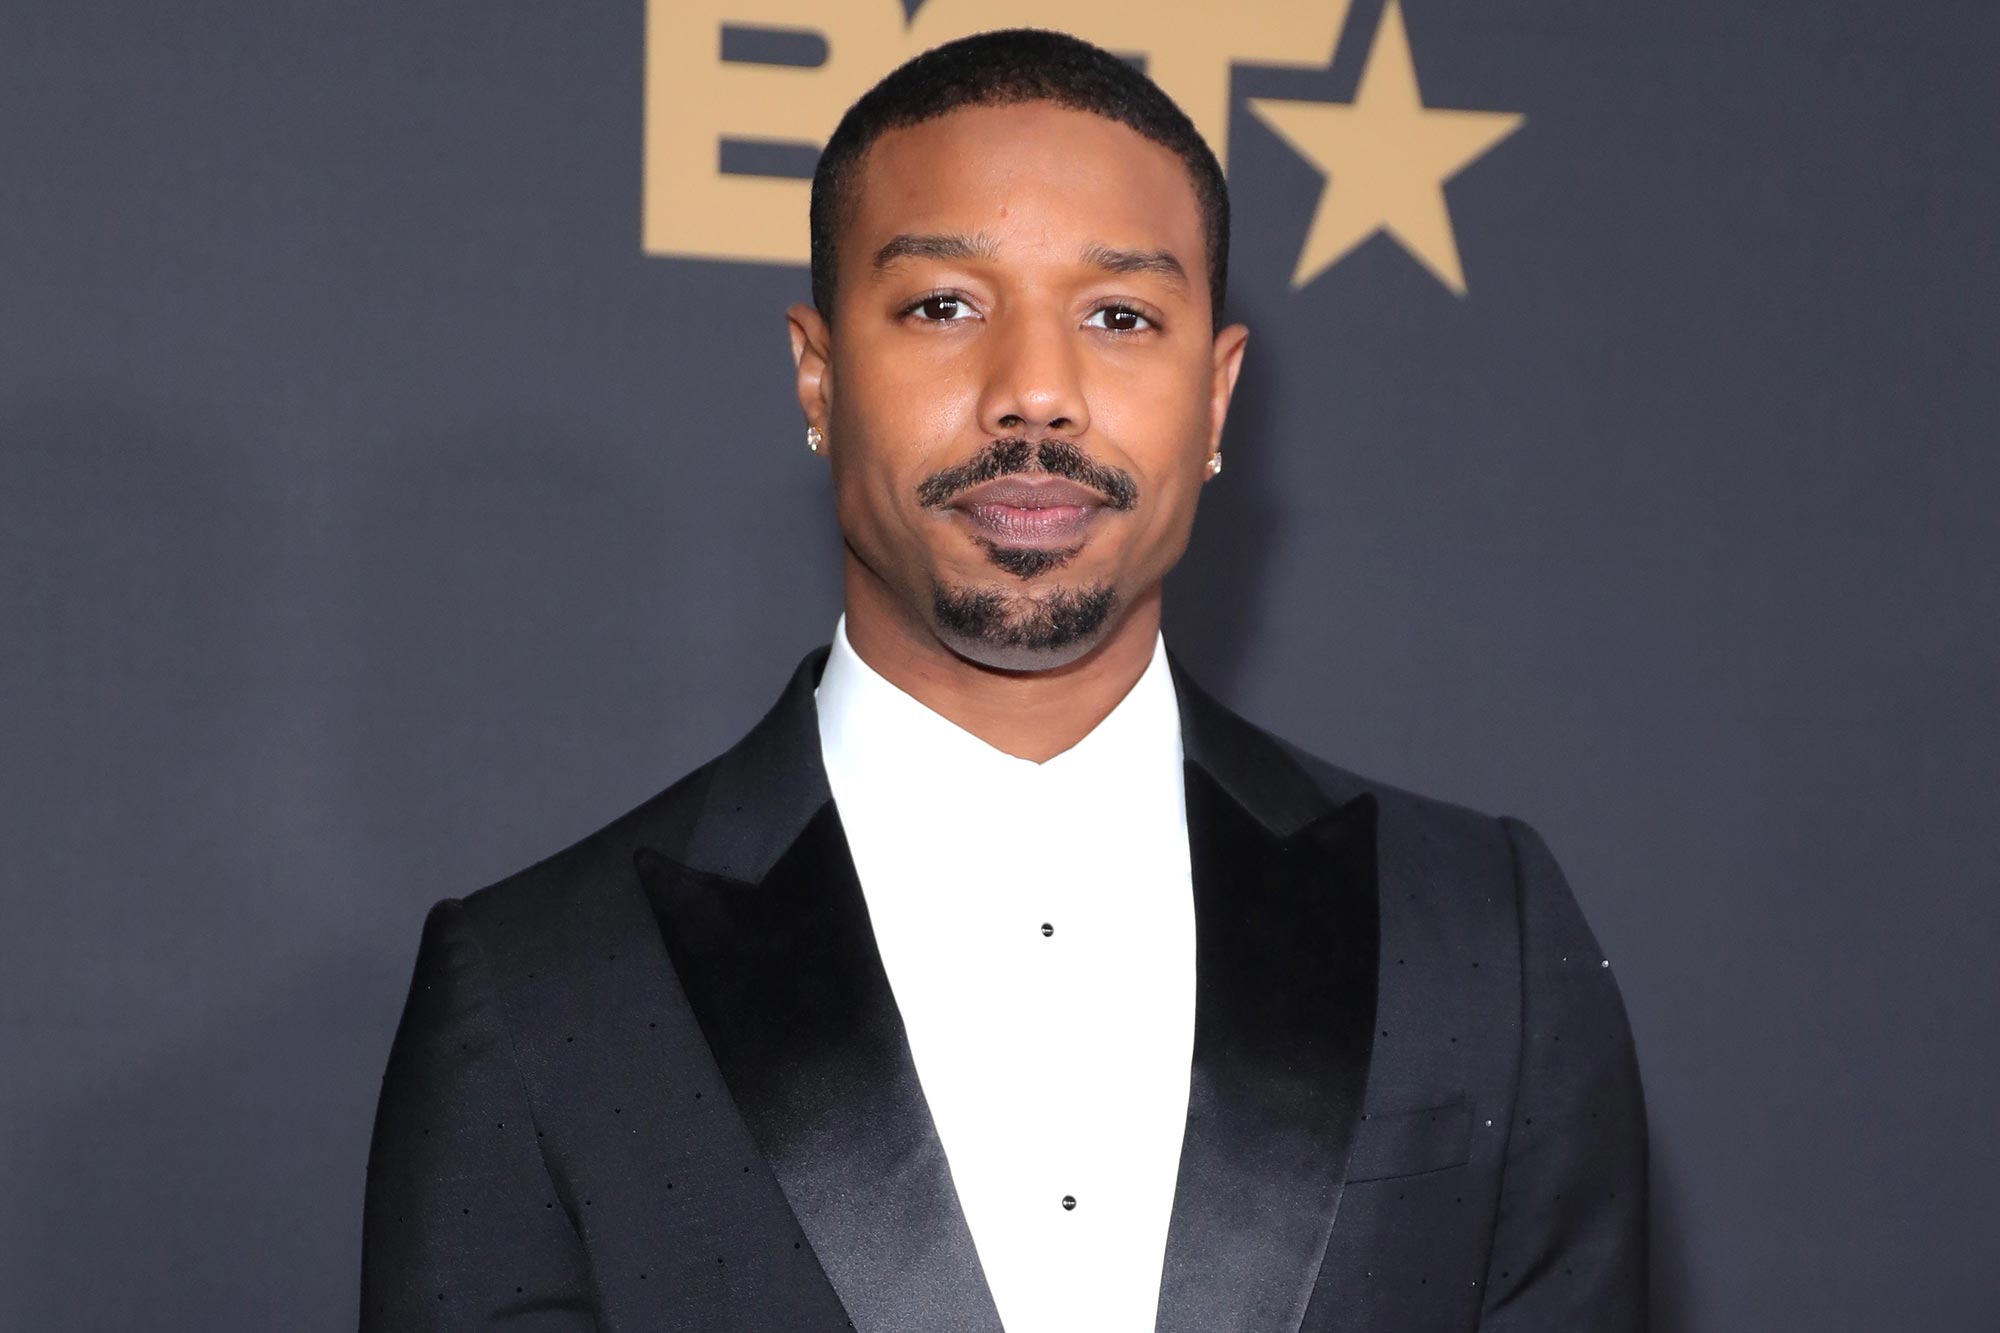 Michael B. Jordan Apologizes for Cultural Appropriation Remarks Over New Rum Brand